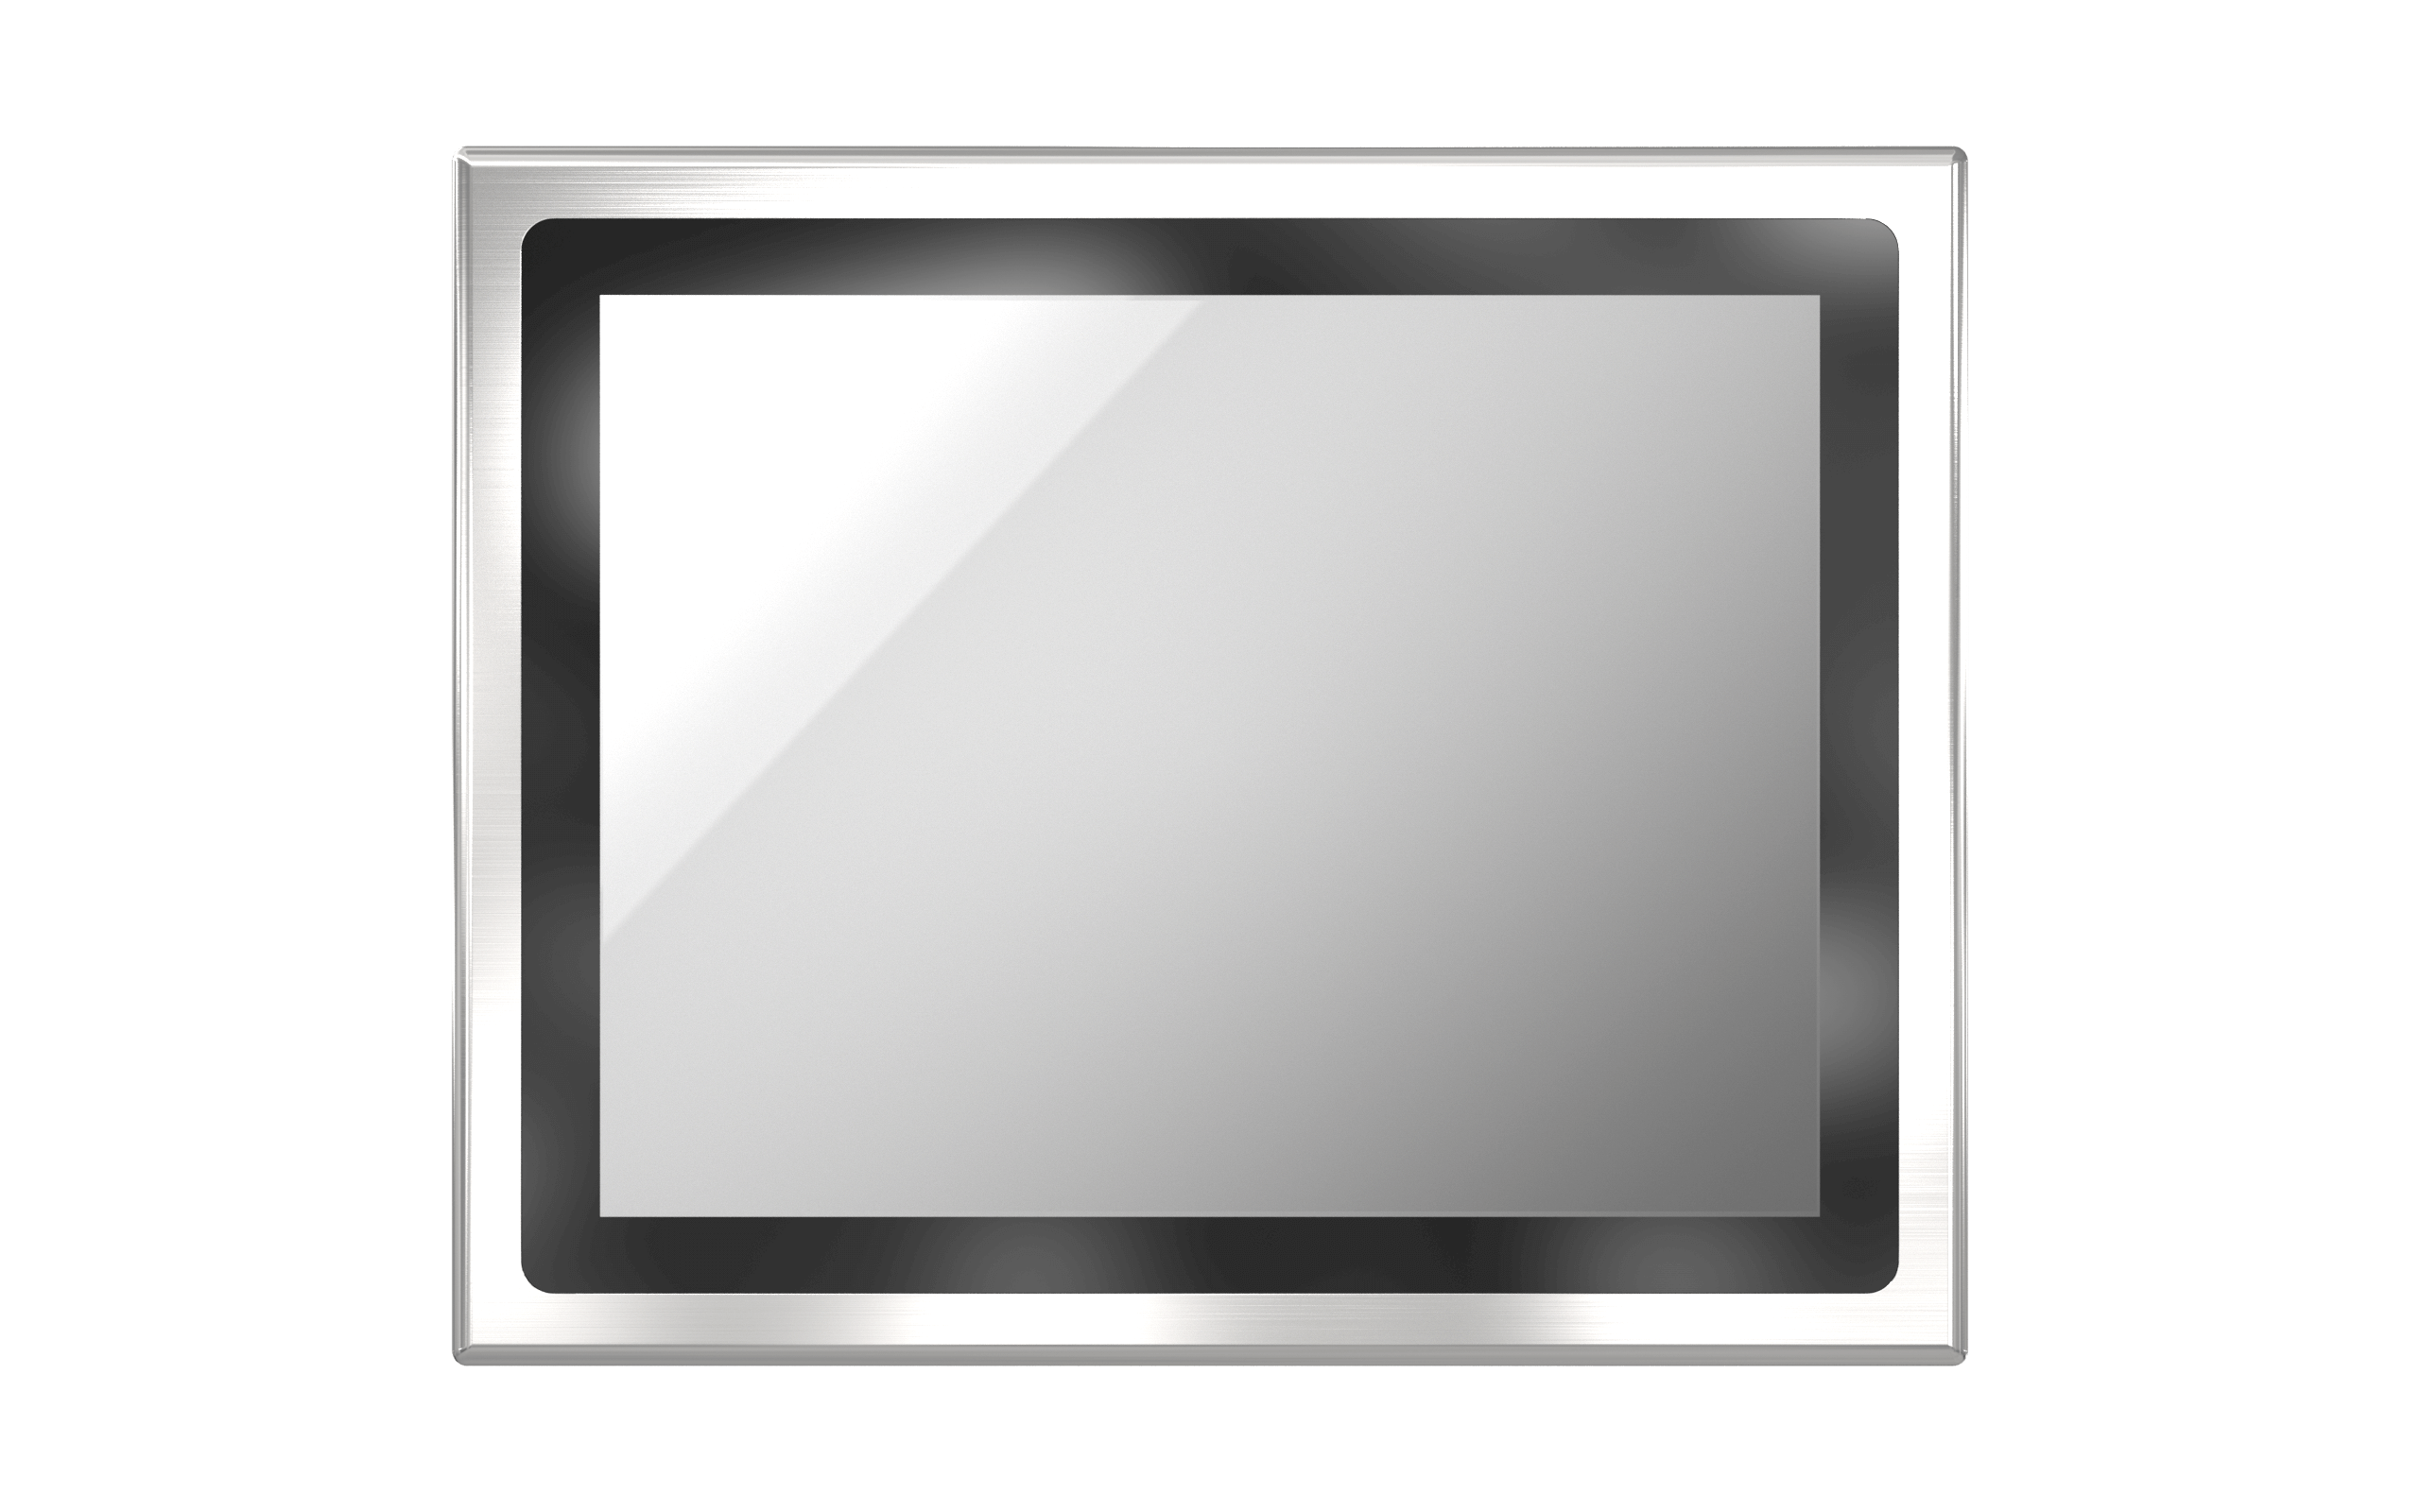 SIO-215-J1900 15" Stainless Steel Panel PC with Intel® Celeron® J1900, M12 US PWR Cord